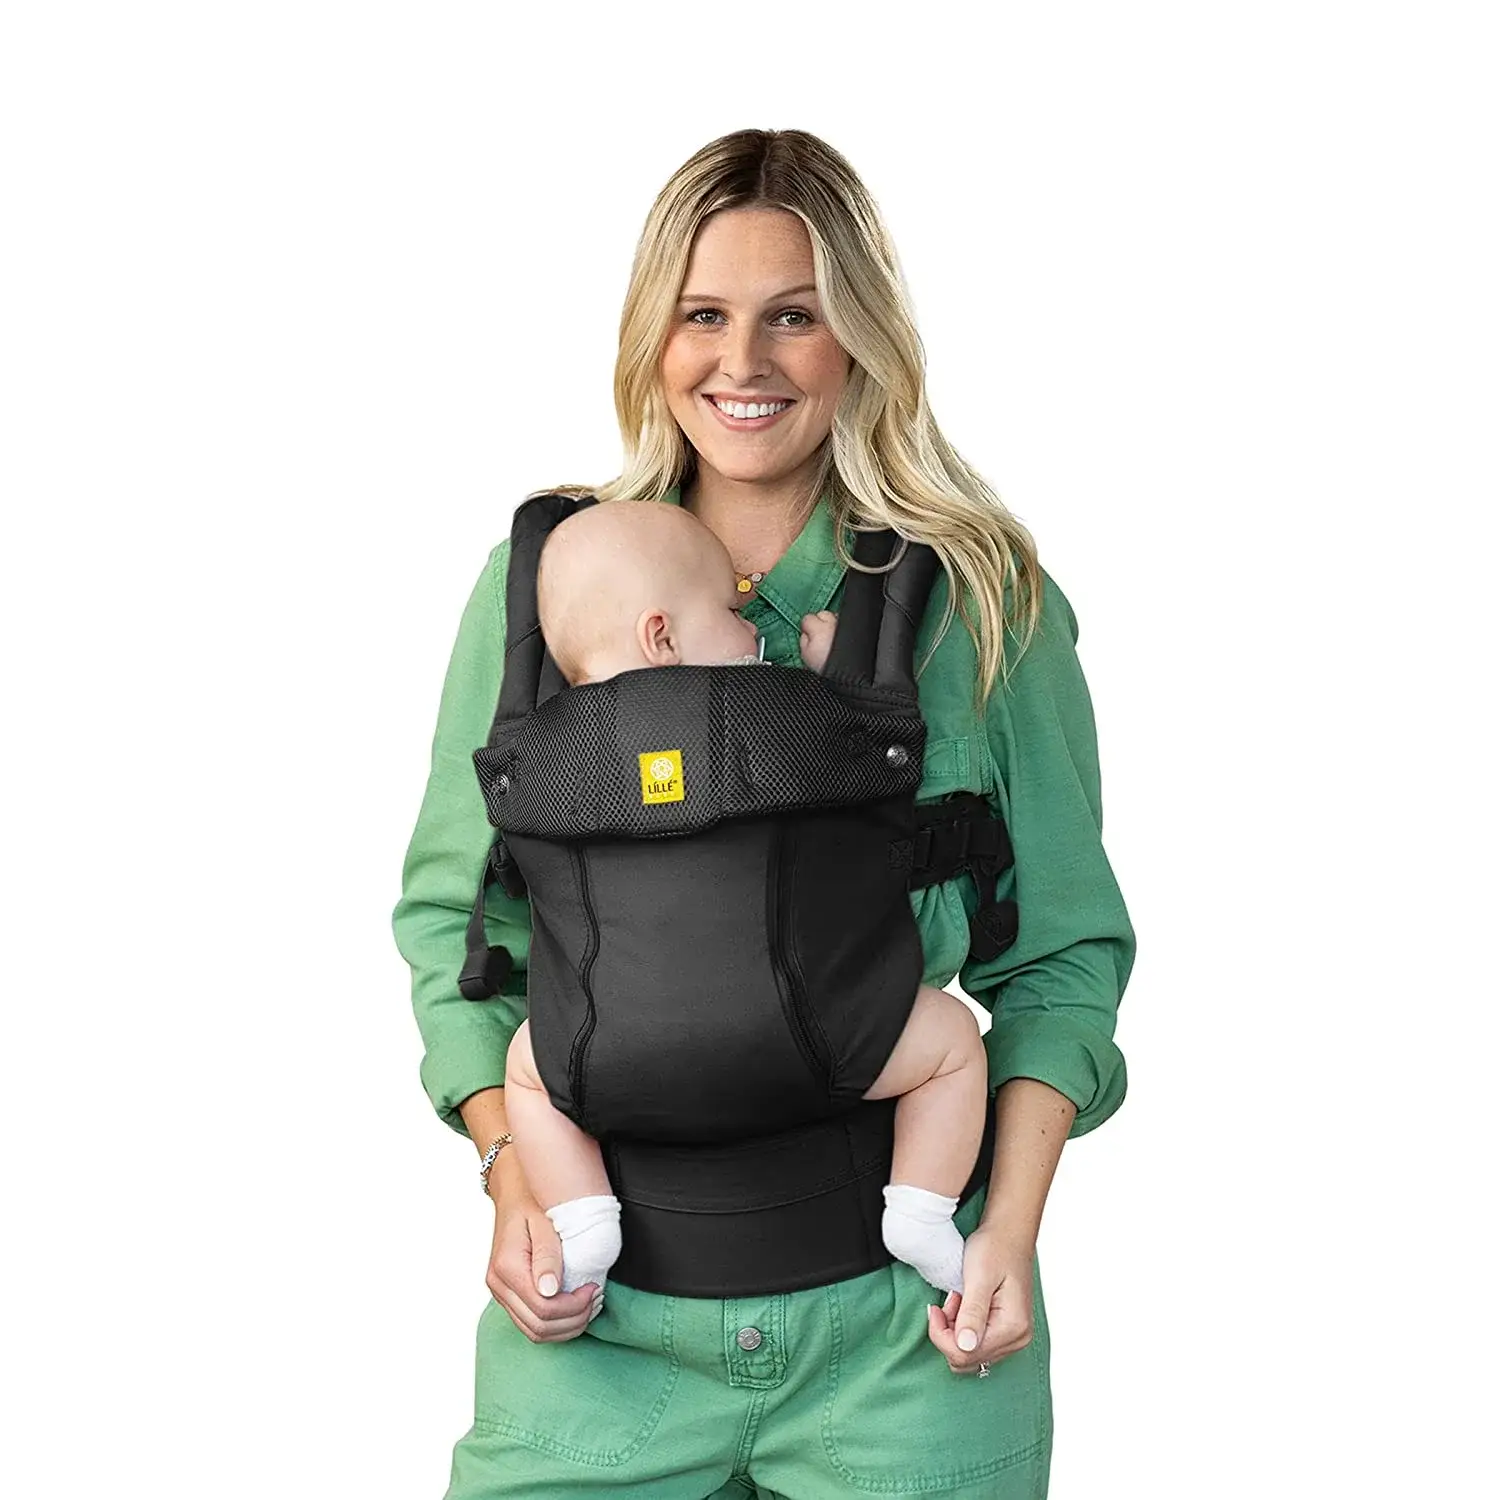 A mother carrying her sleeping baby in a baby carrier - Top 10 Baby Carriers to Buy